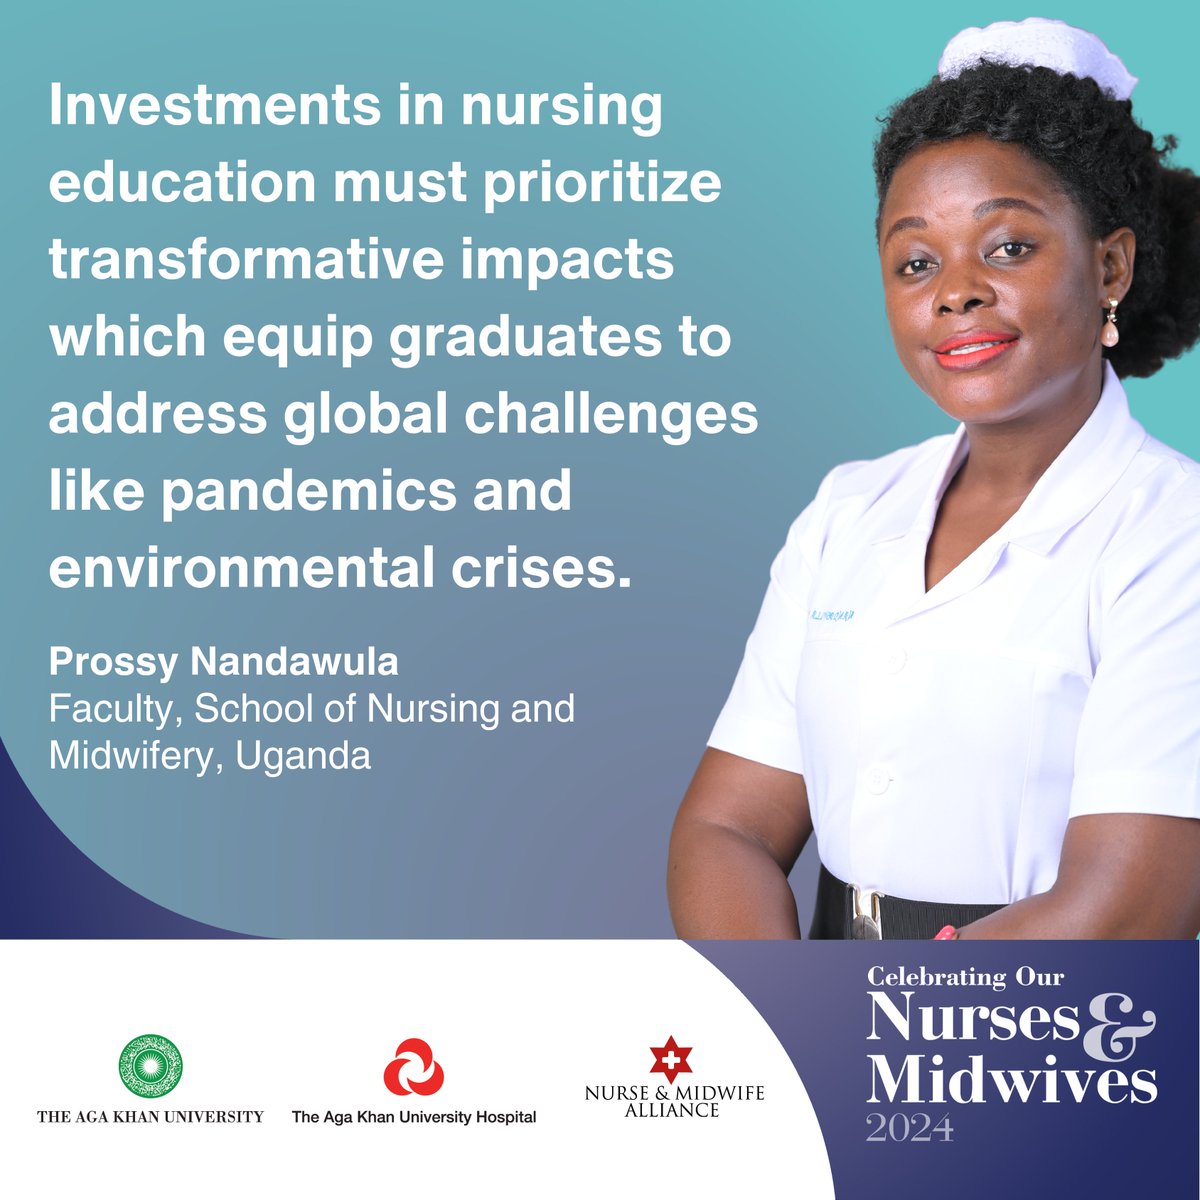 Nursing & midwifery education drive intellectual freedom, uniting professionals for healthcare goals. Investments must prioritize transformative impacts, equipping grads for pandemics & environmental crises. 

#IDM2024 #MidwivesAndClimate #IND2024 #OurNursesOurFuture